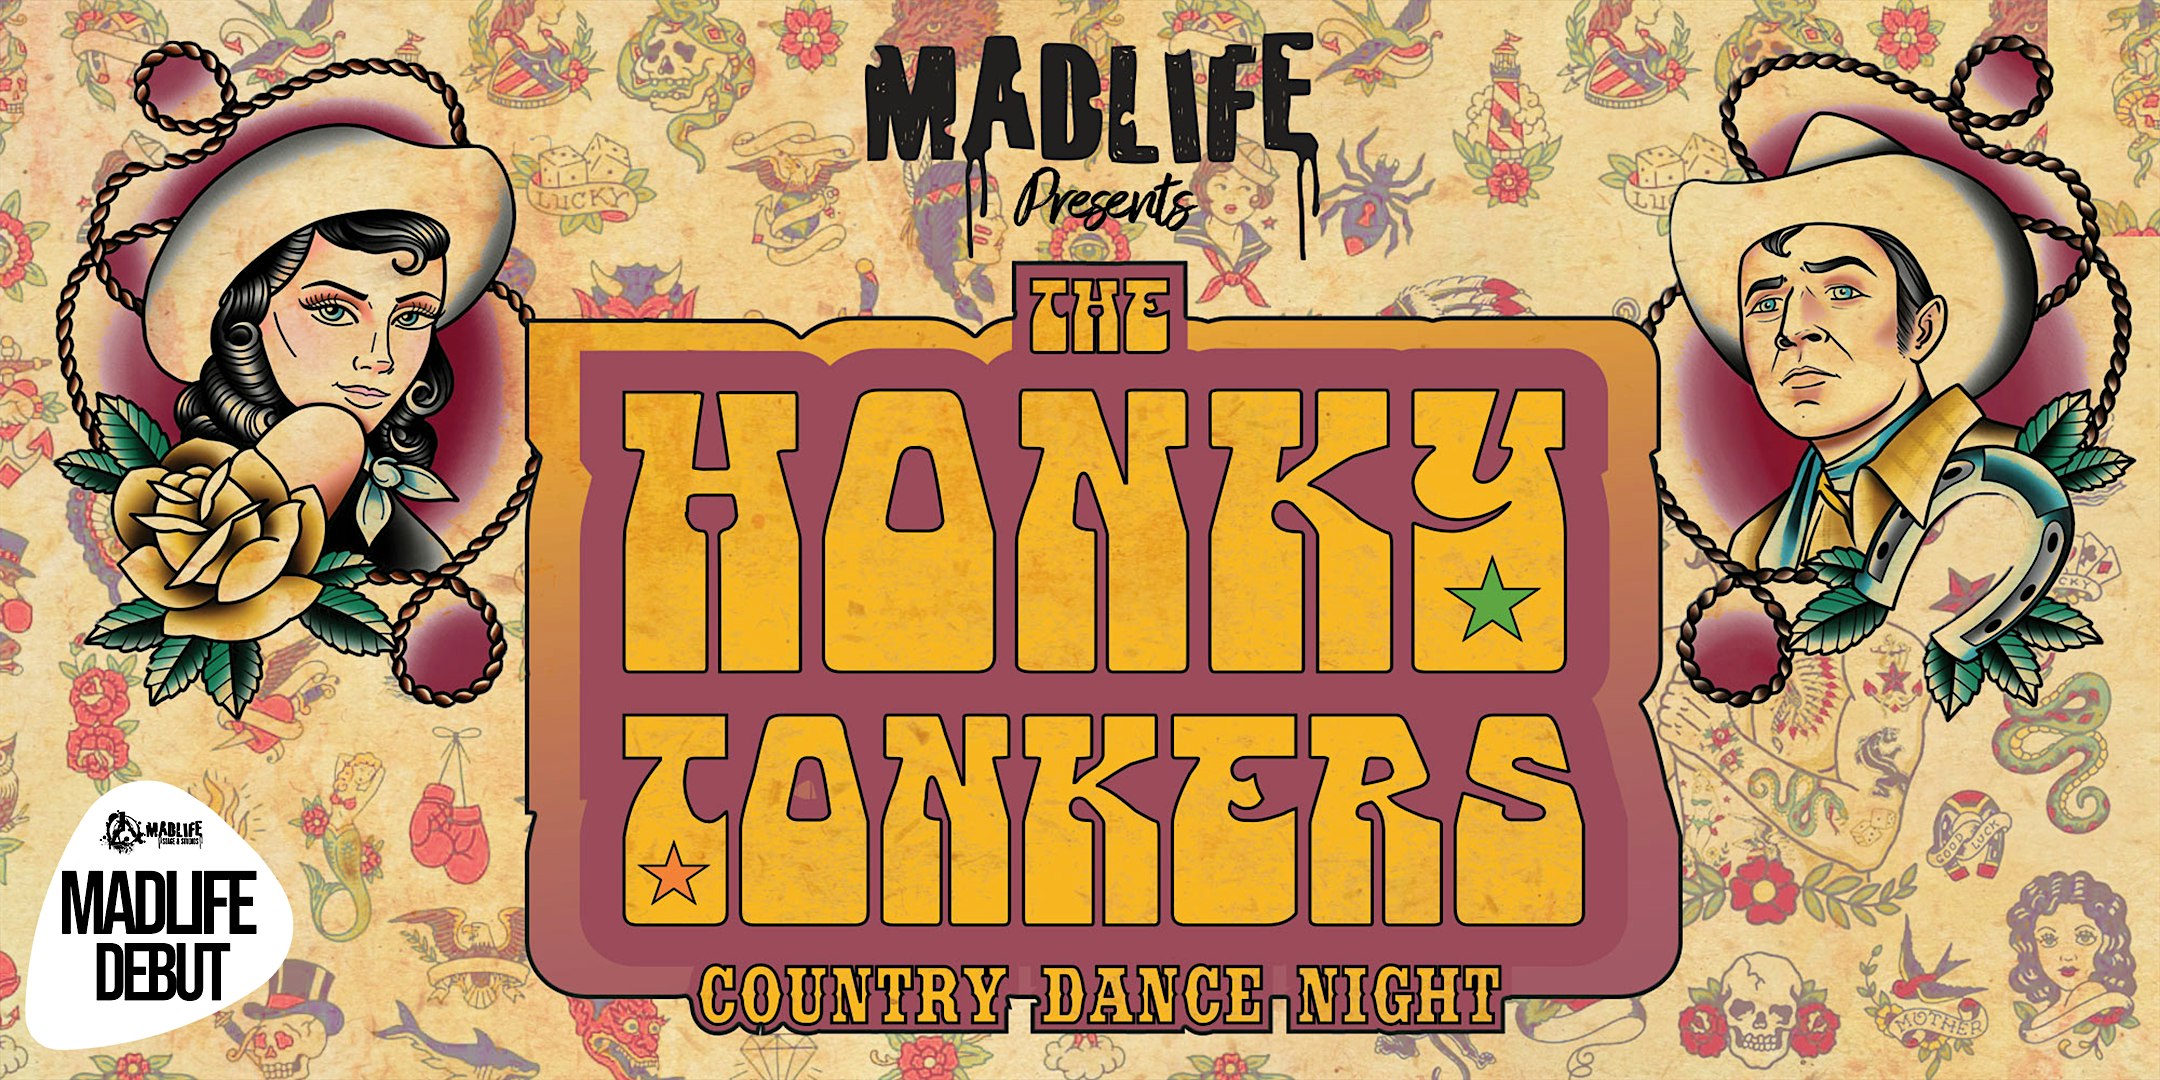 Country Dance Night featuring The Honky Tonkers